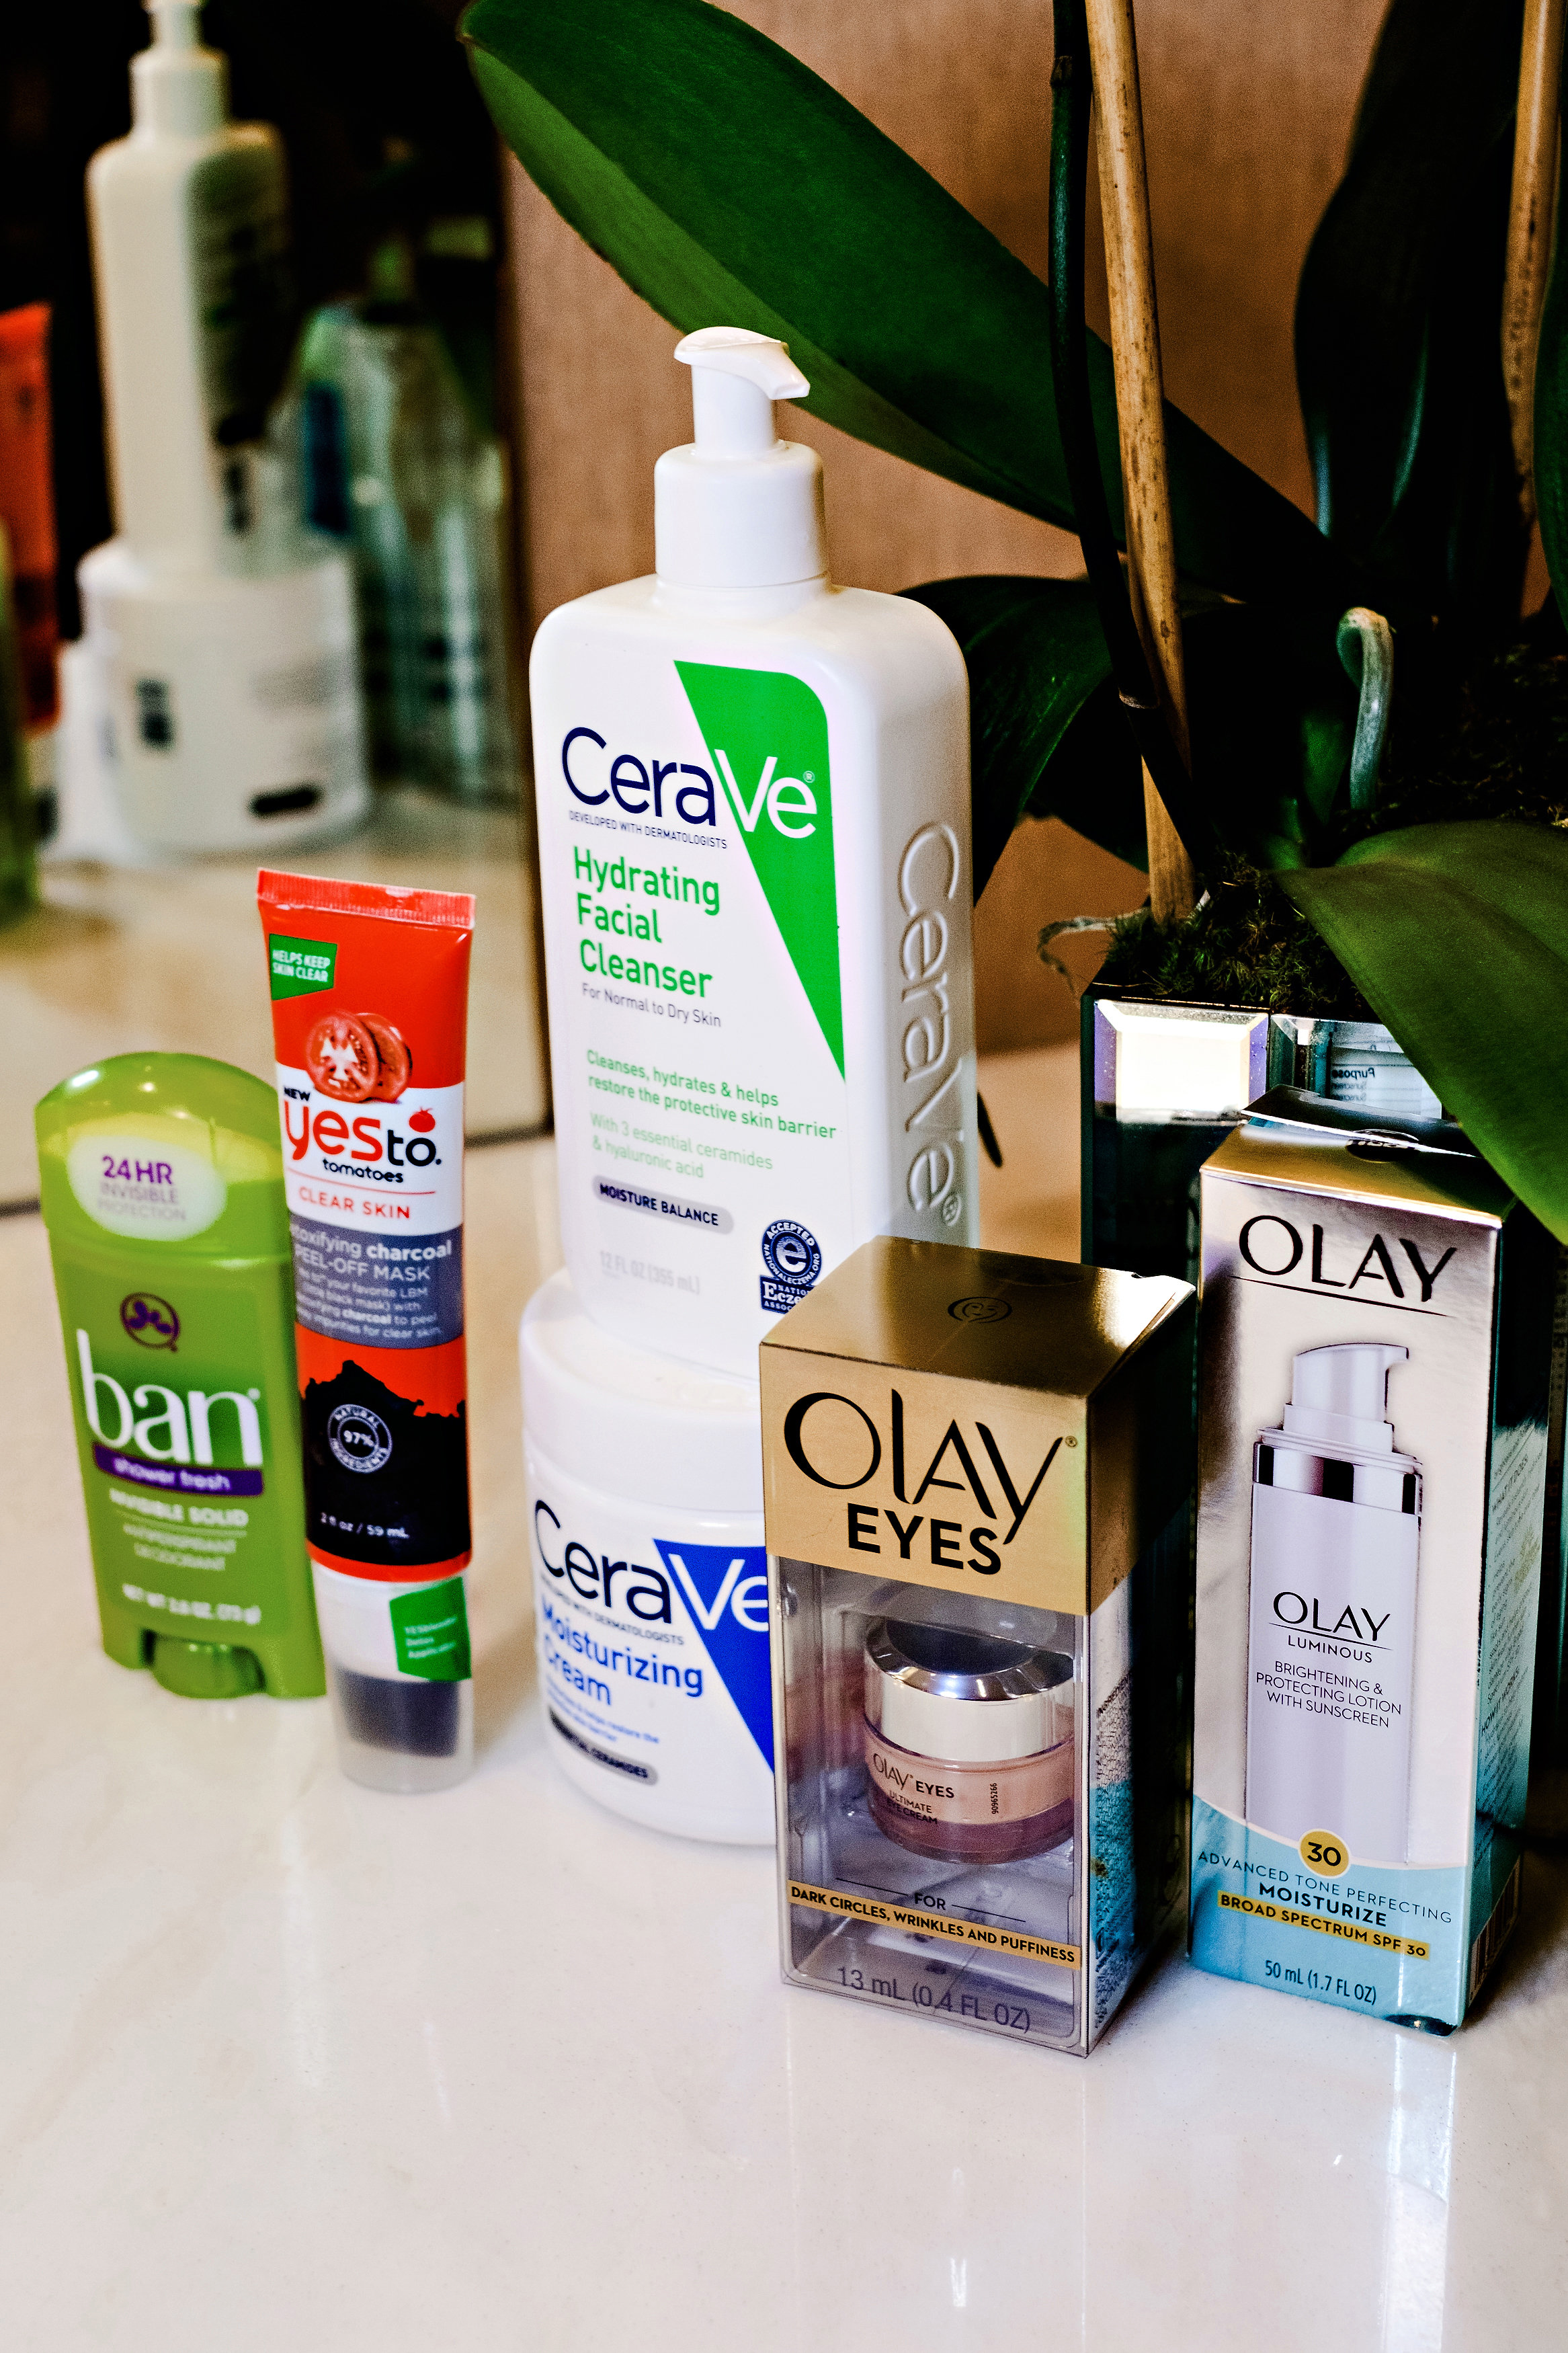 Drugstore Skincare with CVS by Atlanta style blogger Happily Hughes